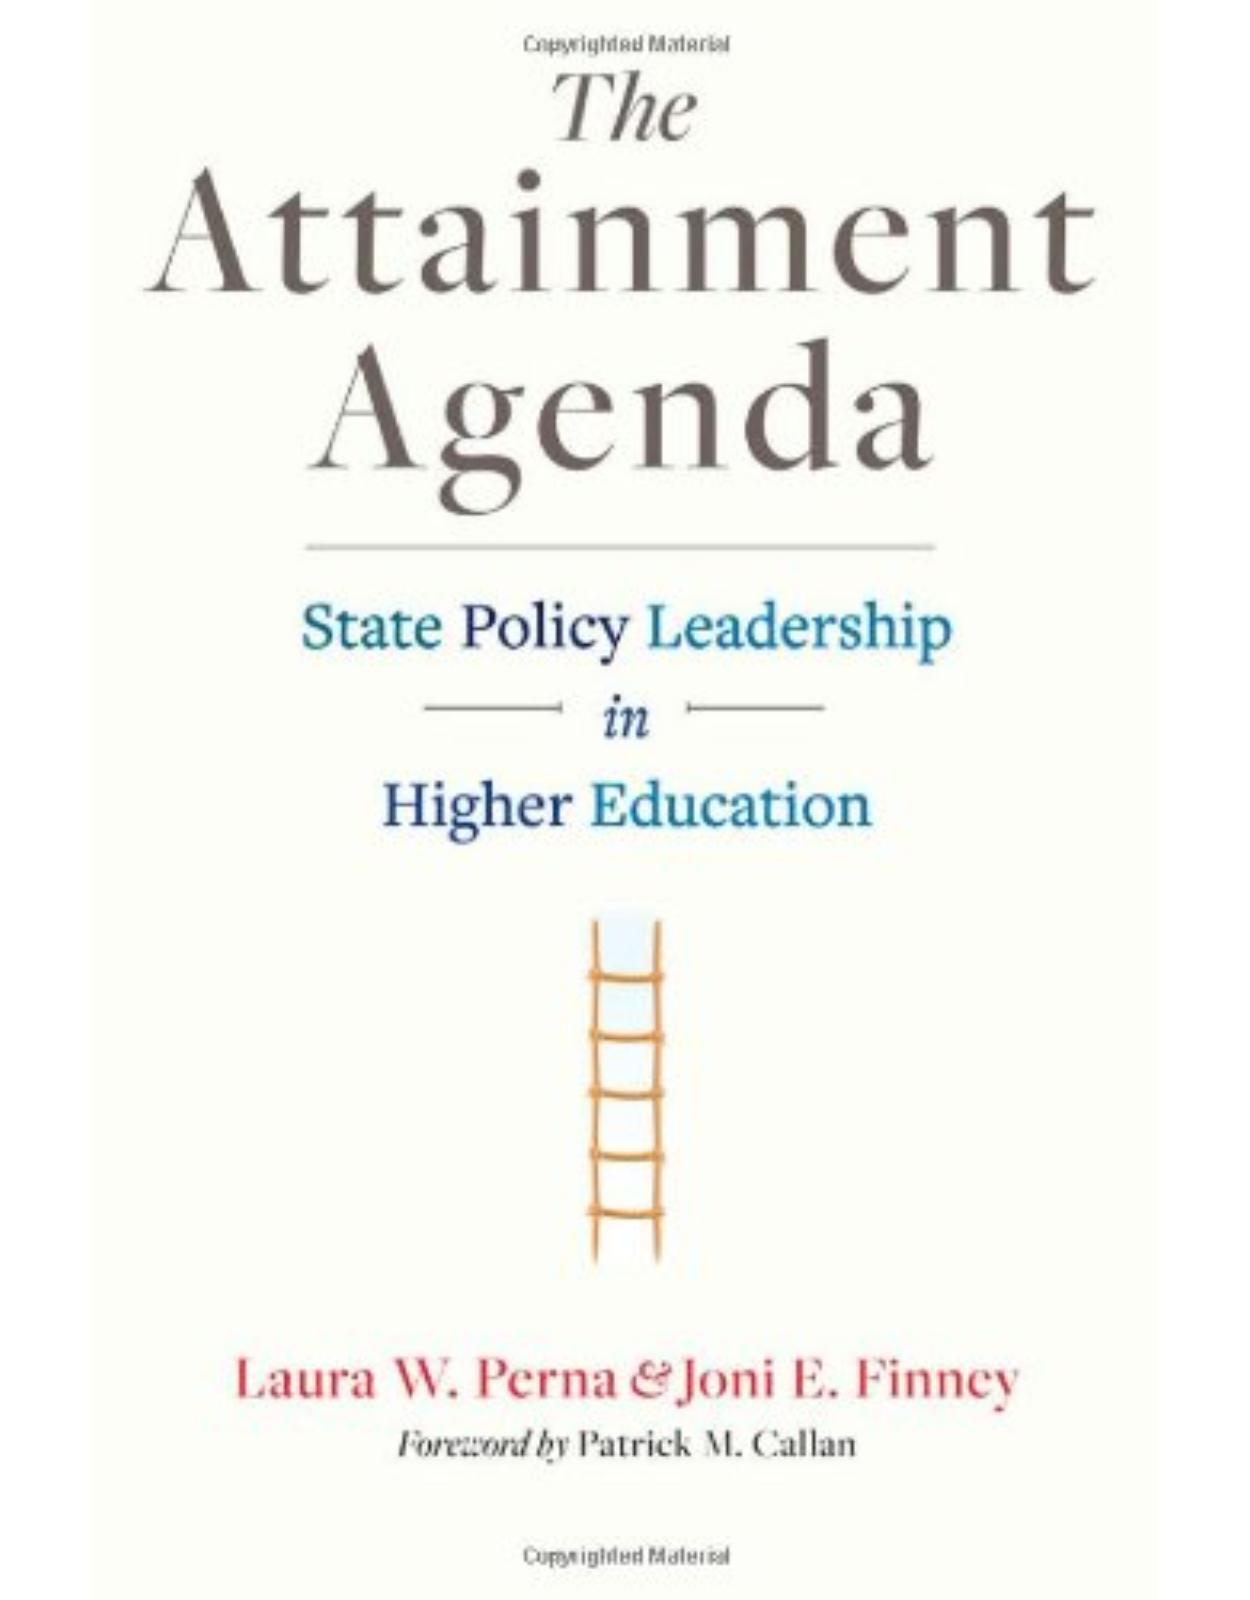 Attainment Agenda, State Policy Leadership in Higher Education